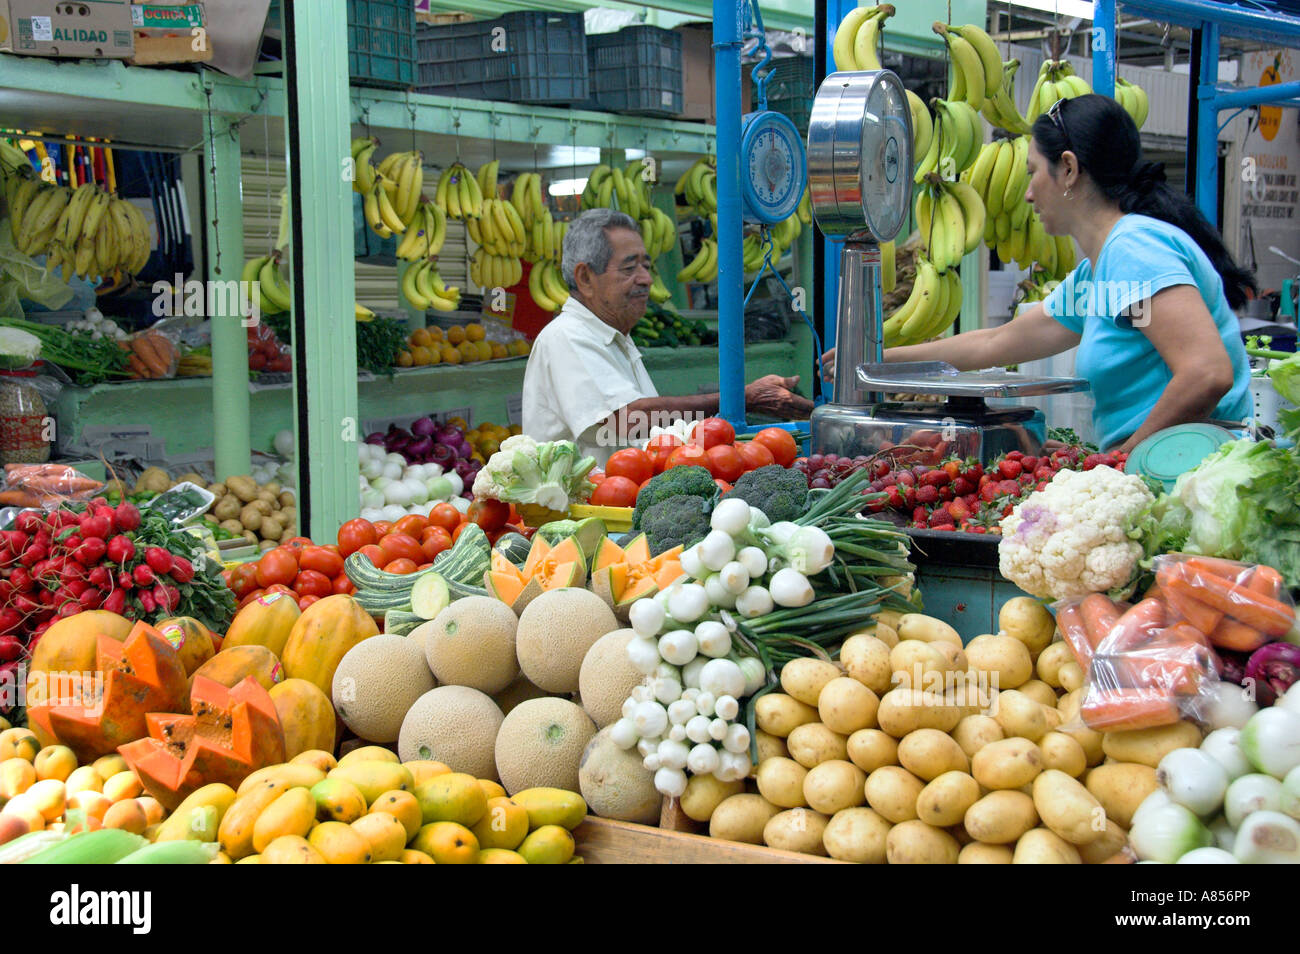 A fruit and vegetable market in the Municipal Market in downtown Mazatlan Mexico Stock Photo